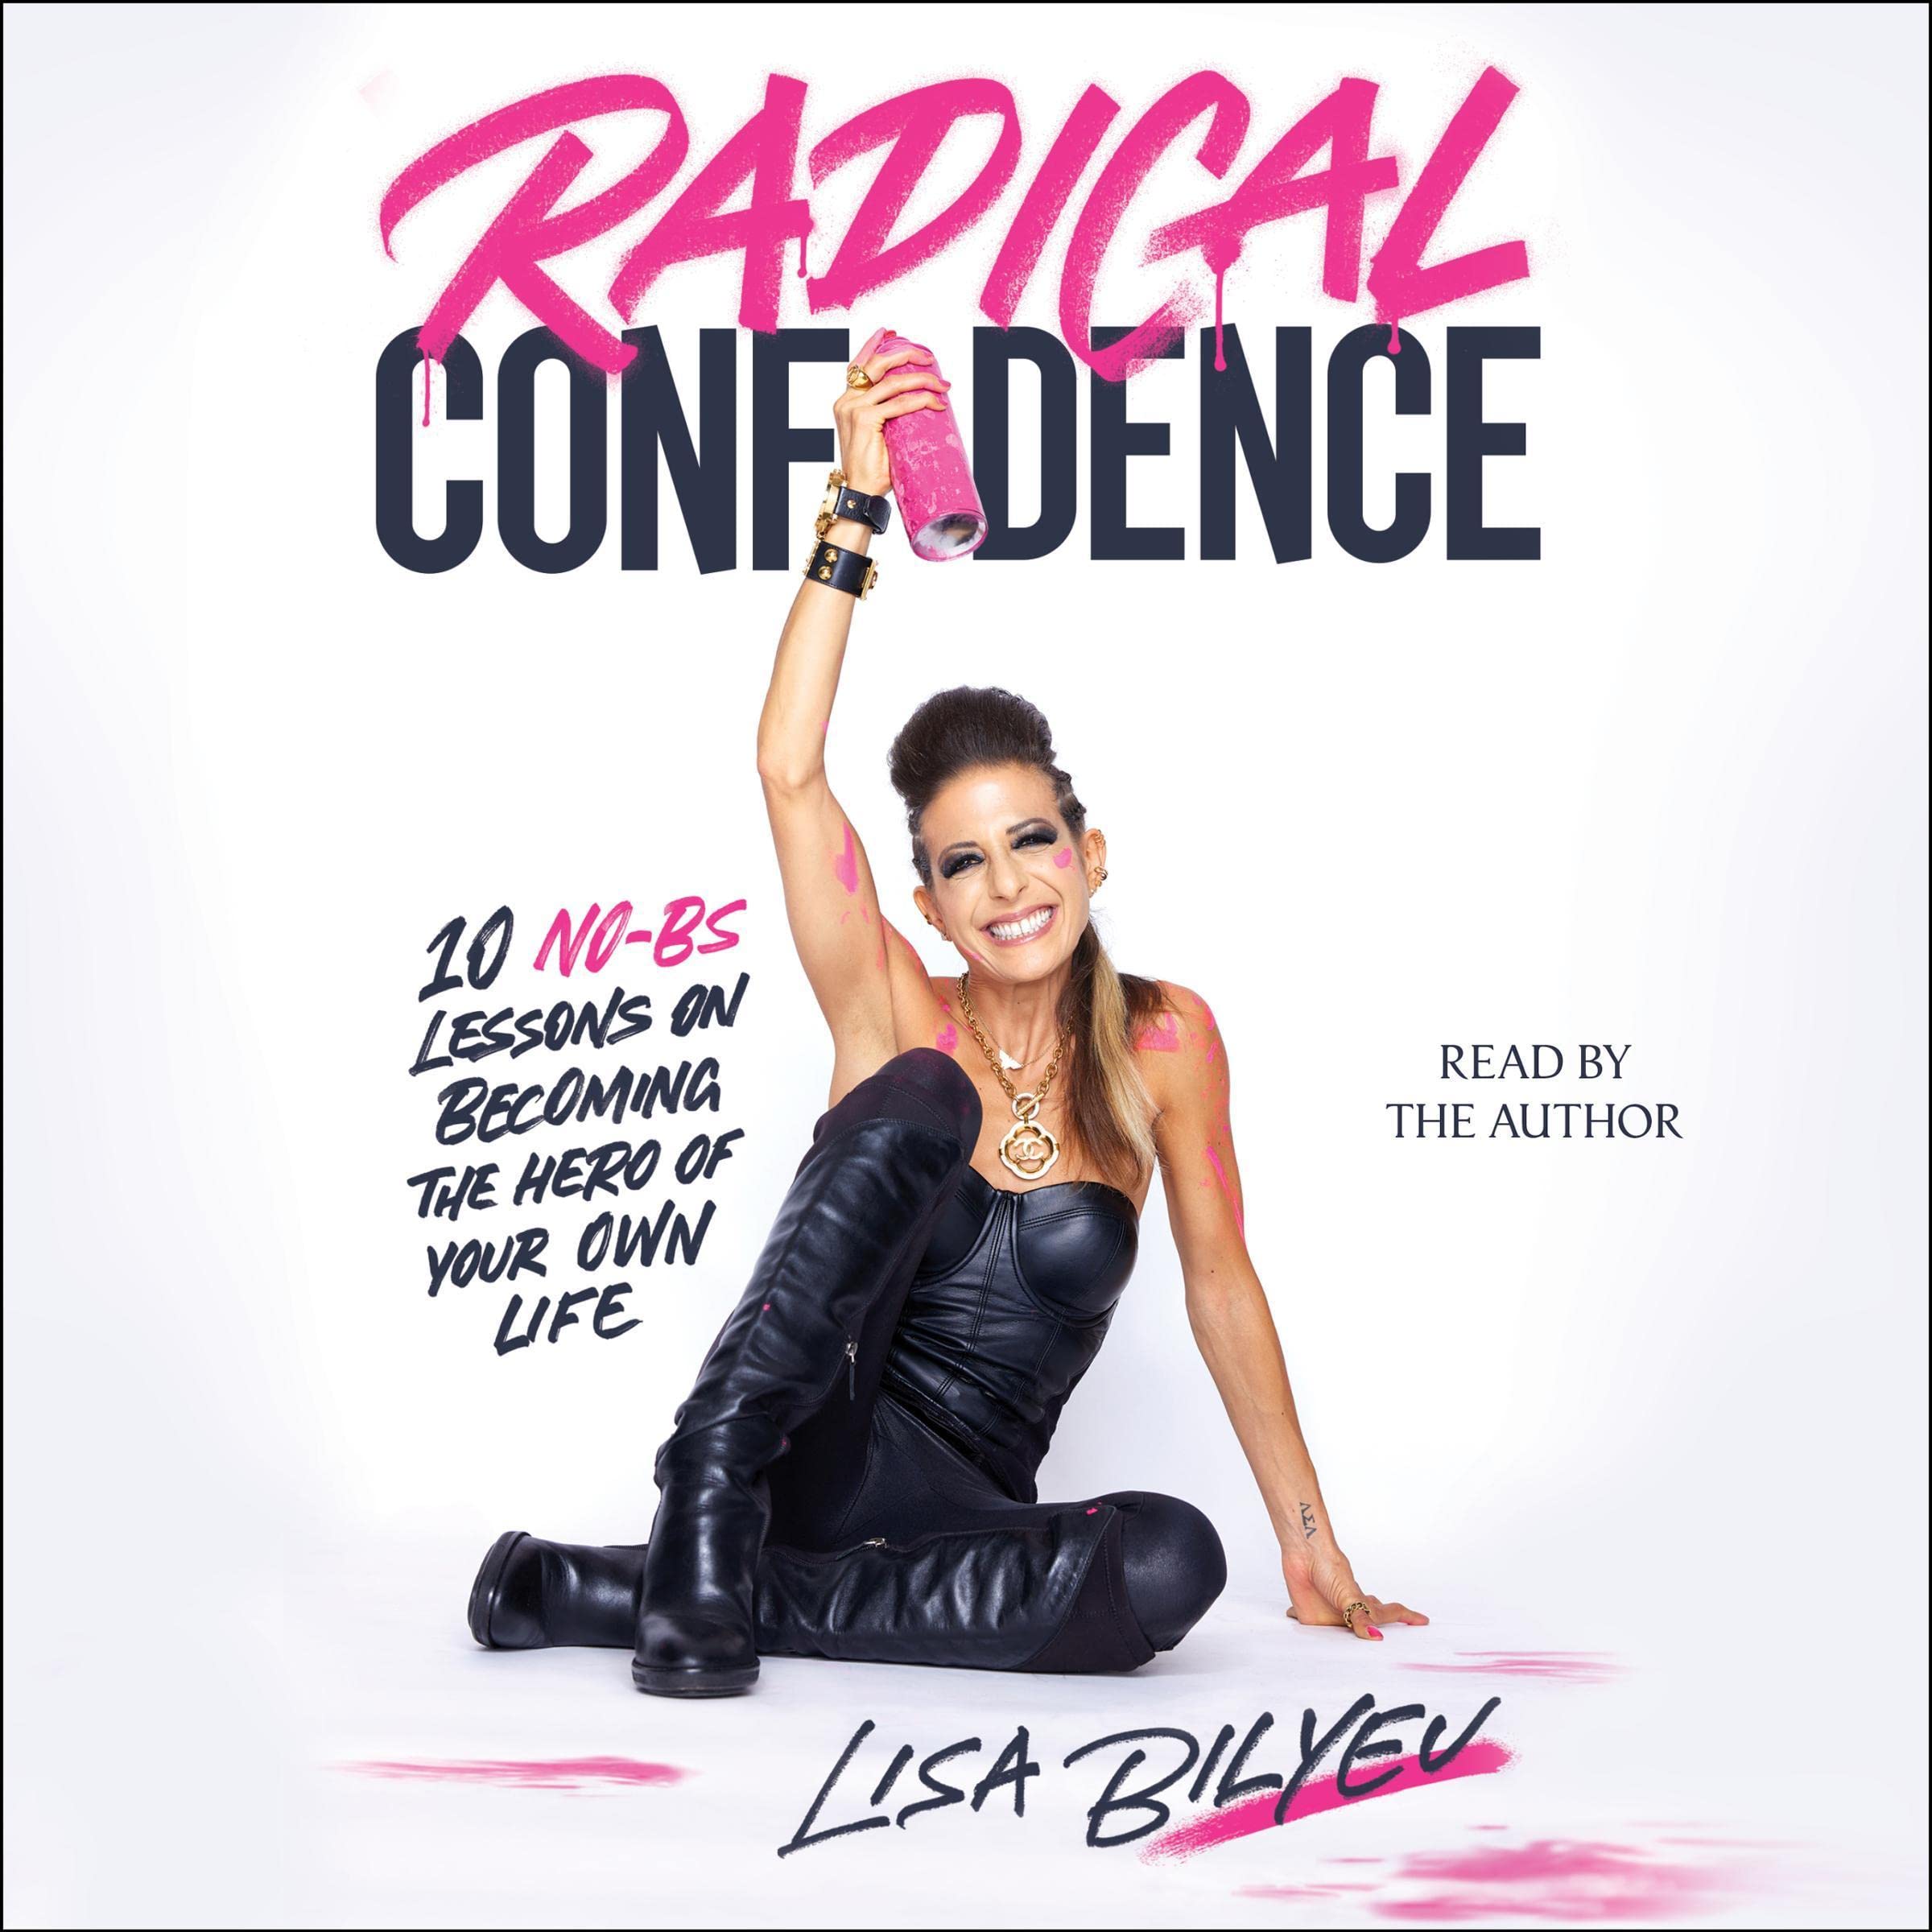 Radical Confidence: 10 No-BS Lessons on Becoming the Hero of Your Own Life